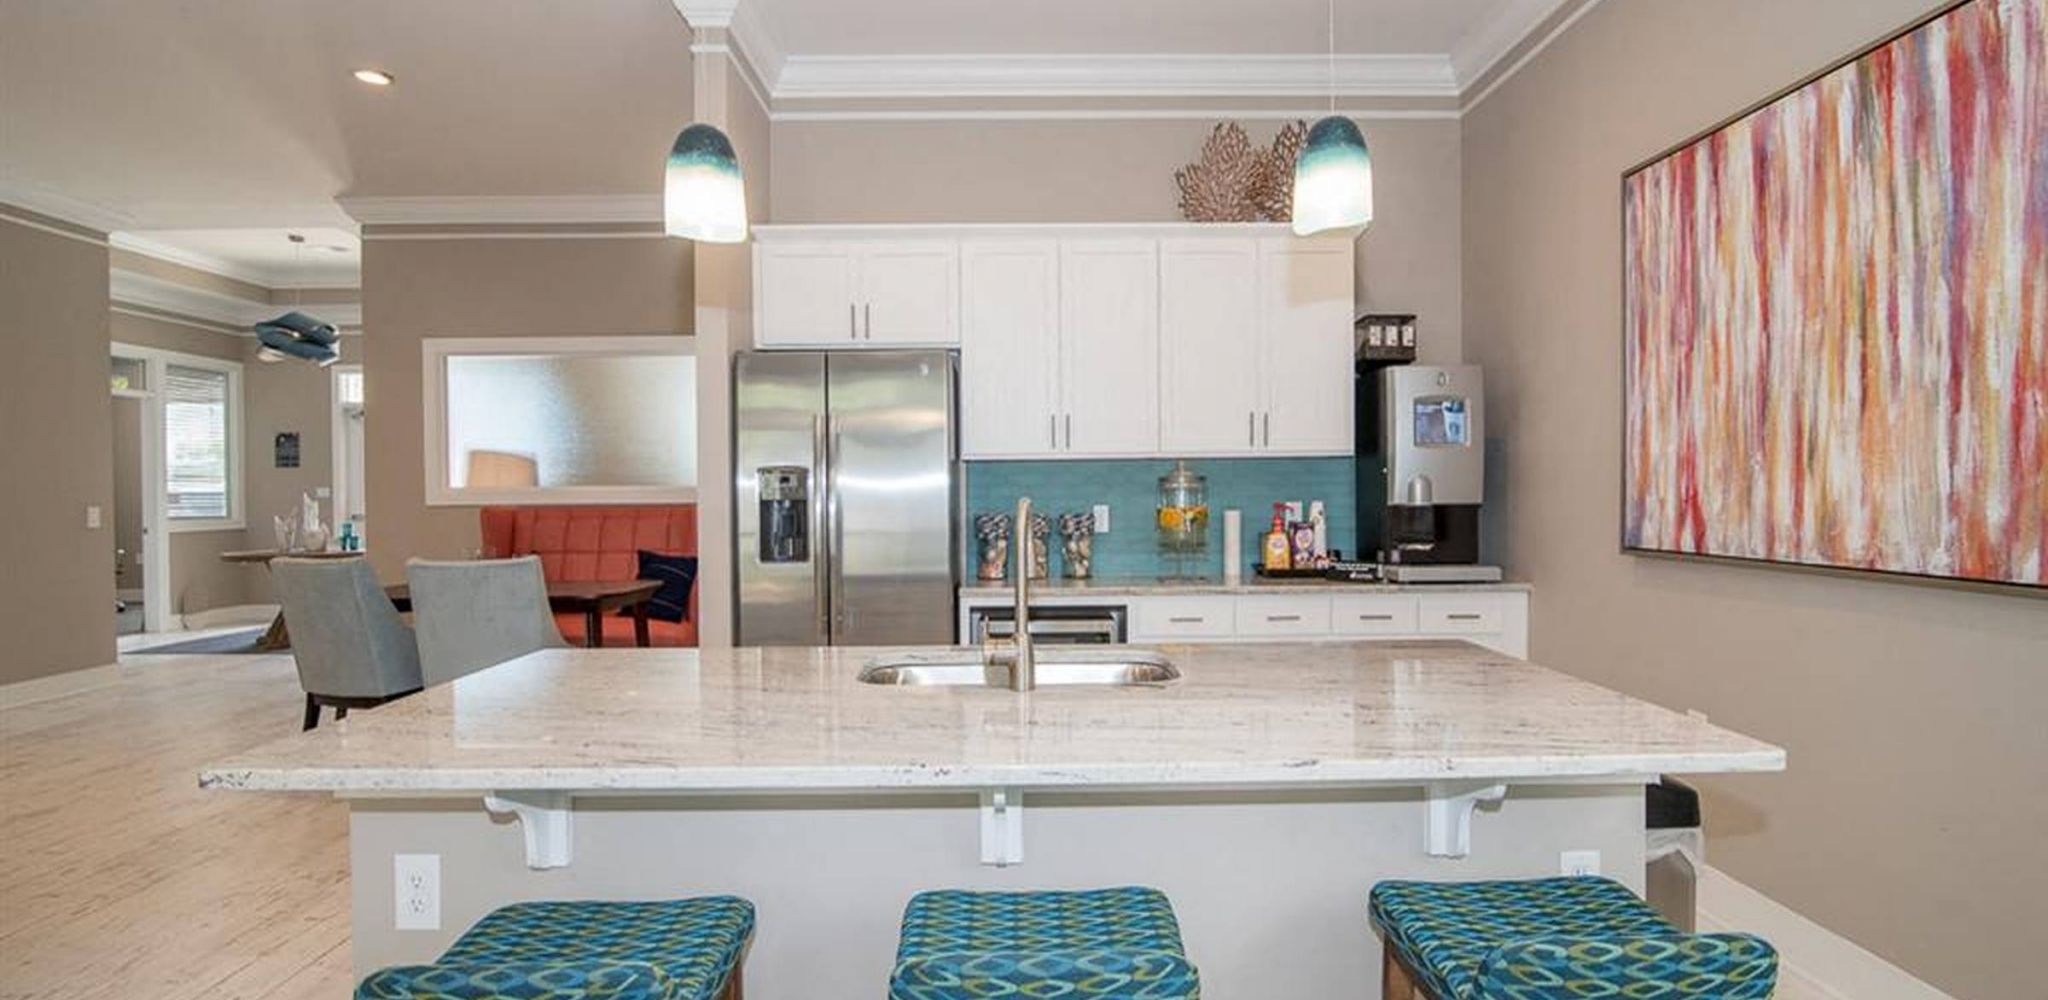 Hawthorne at New Centre resident amenity area with large island with bar stools, stainless steel appliances, and a large sink